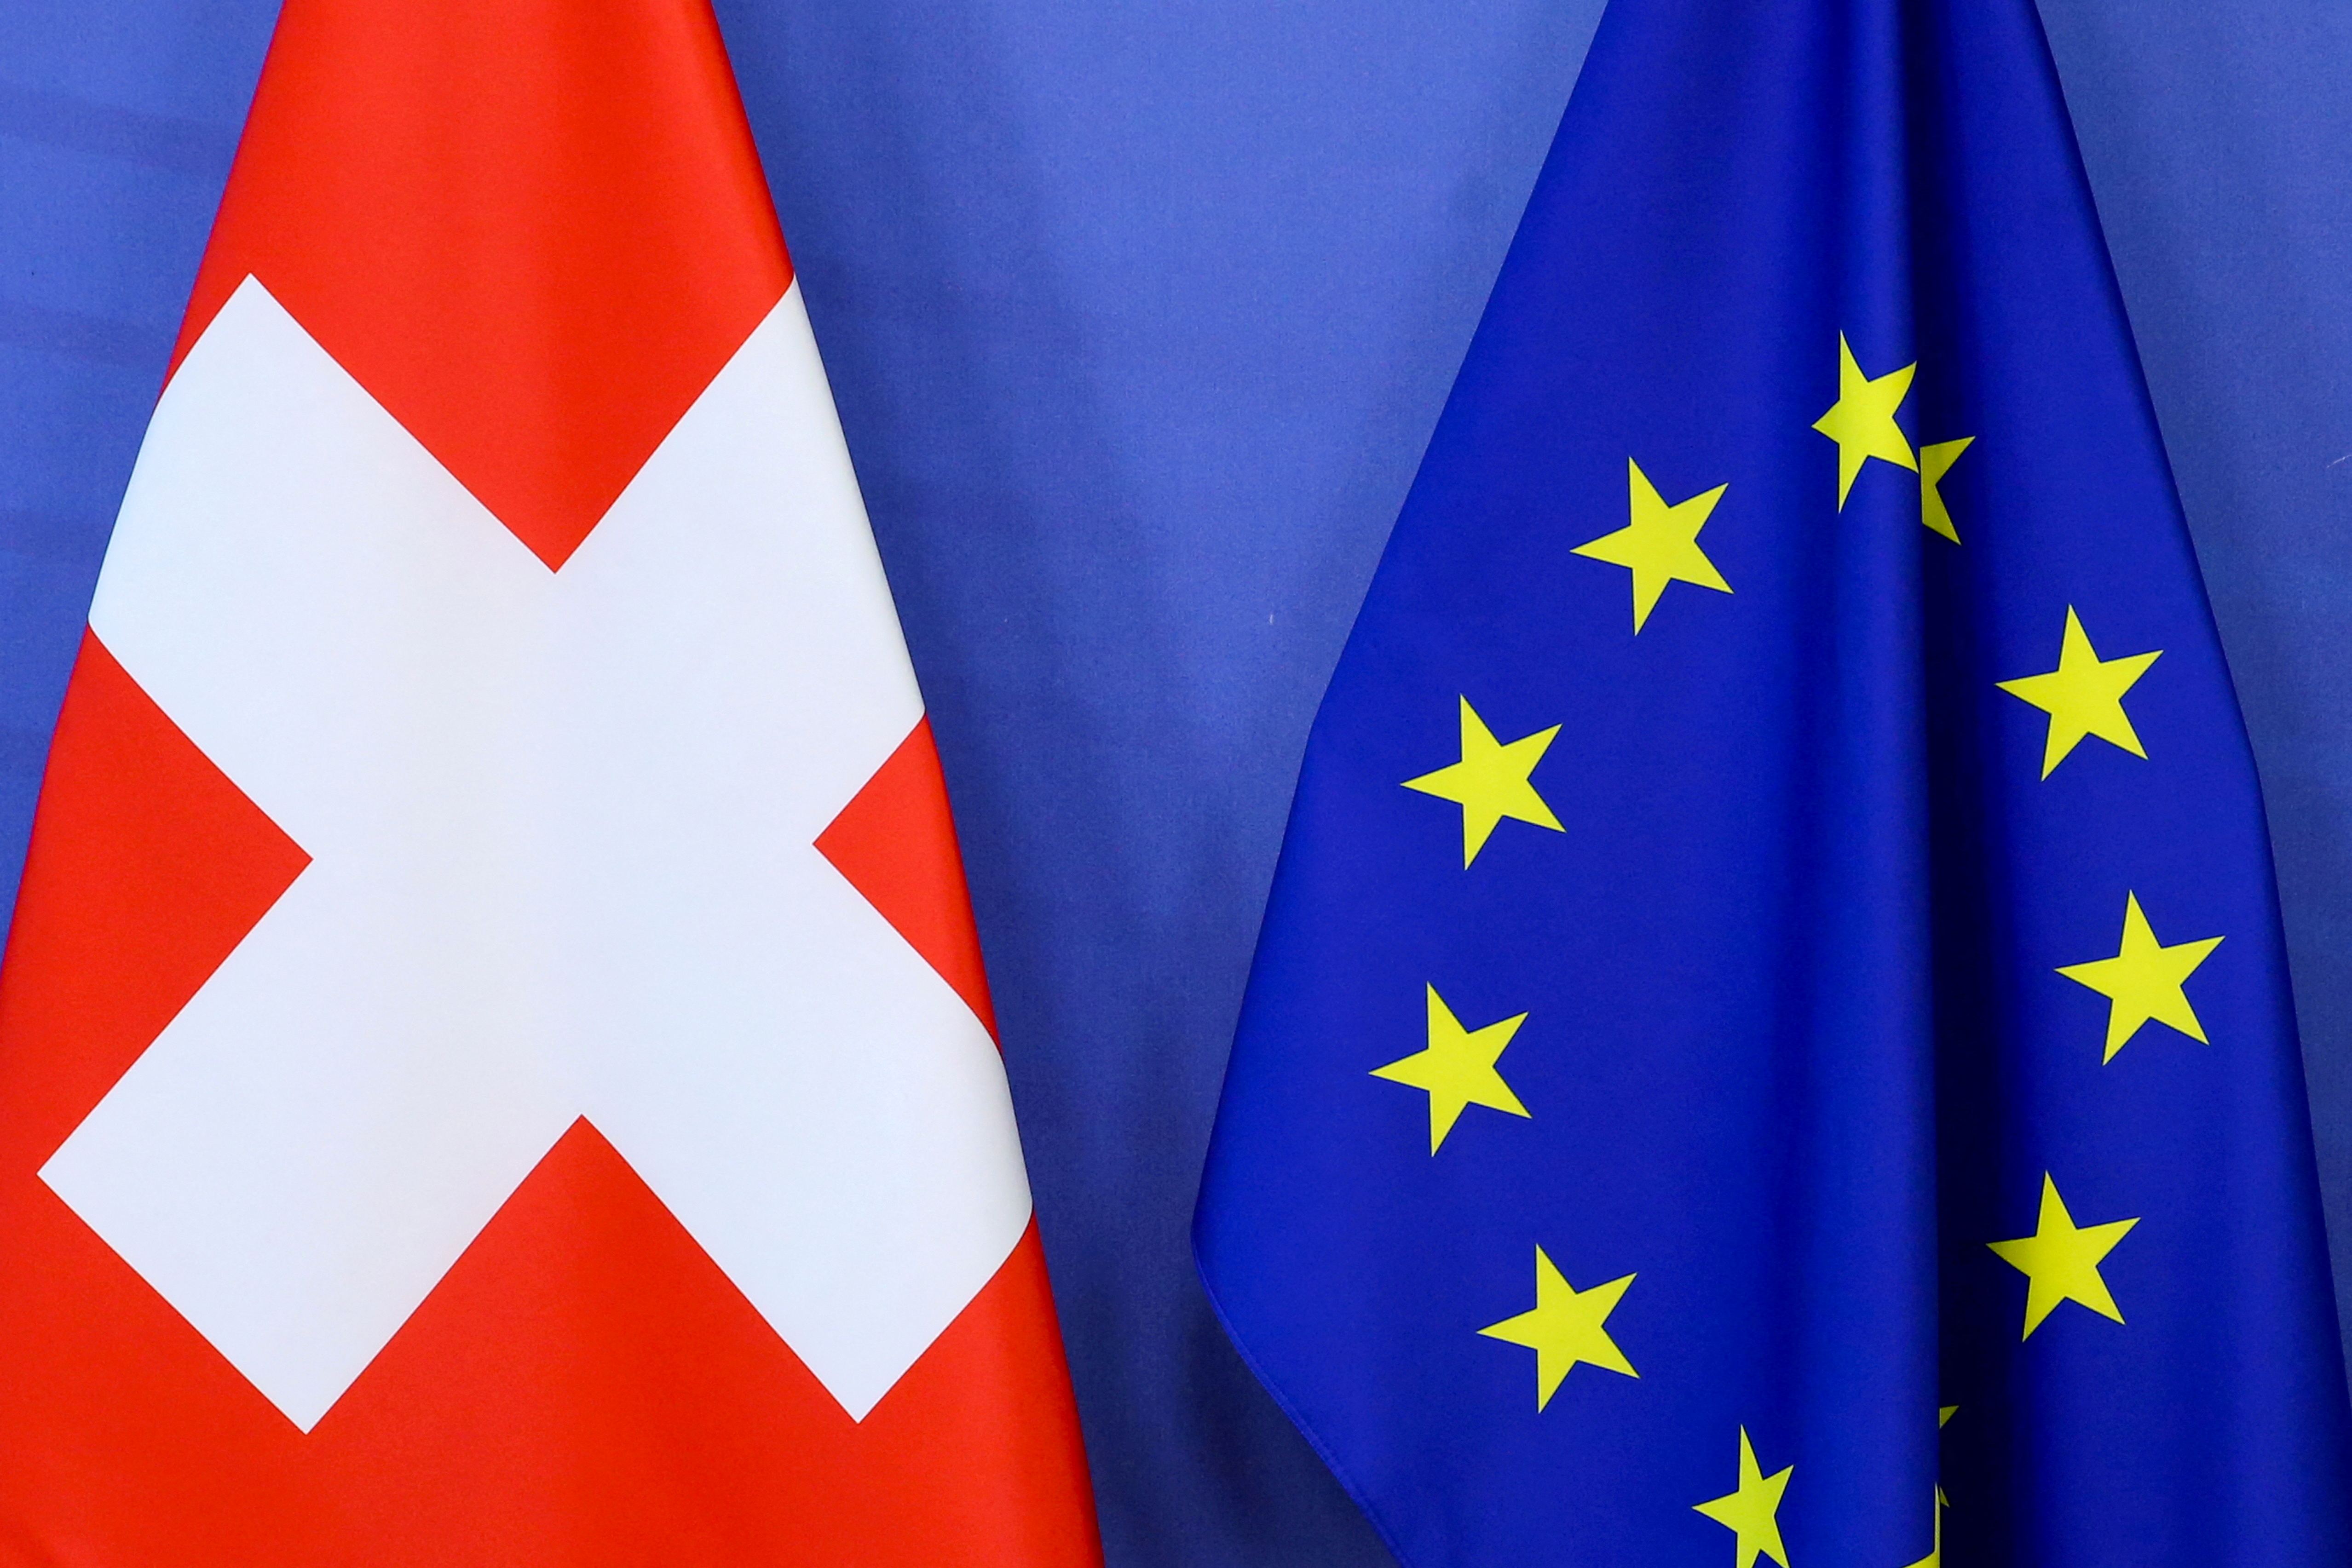 Switzerland's national flag and the European Union flag are seen at the European Commission building in Brussels, Belgium April 23, 2021.